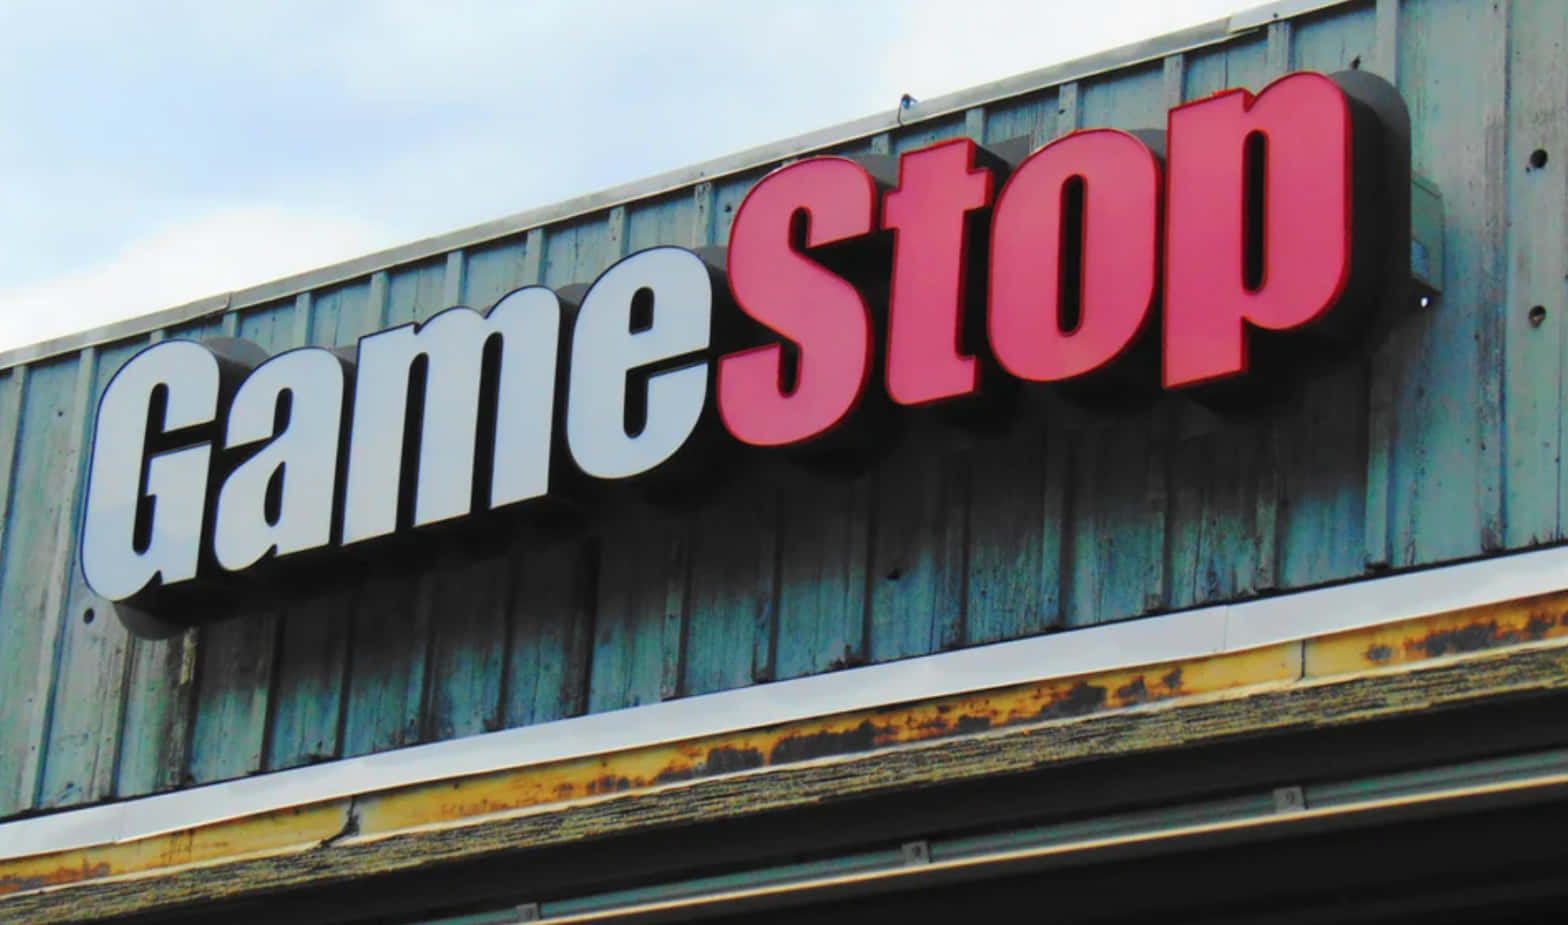 Get yourself the latest games from Gamestop!